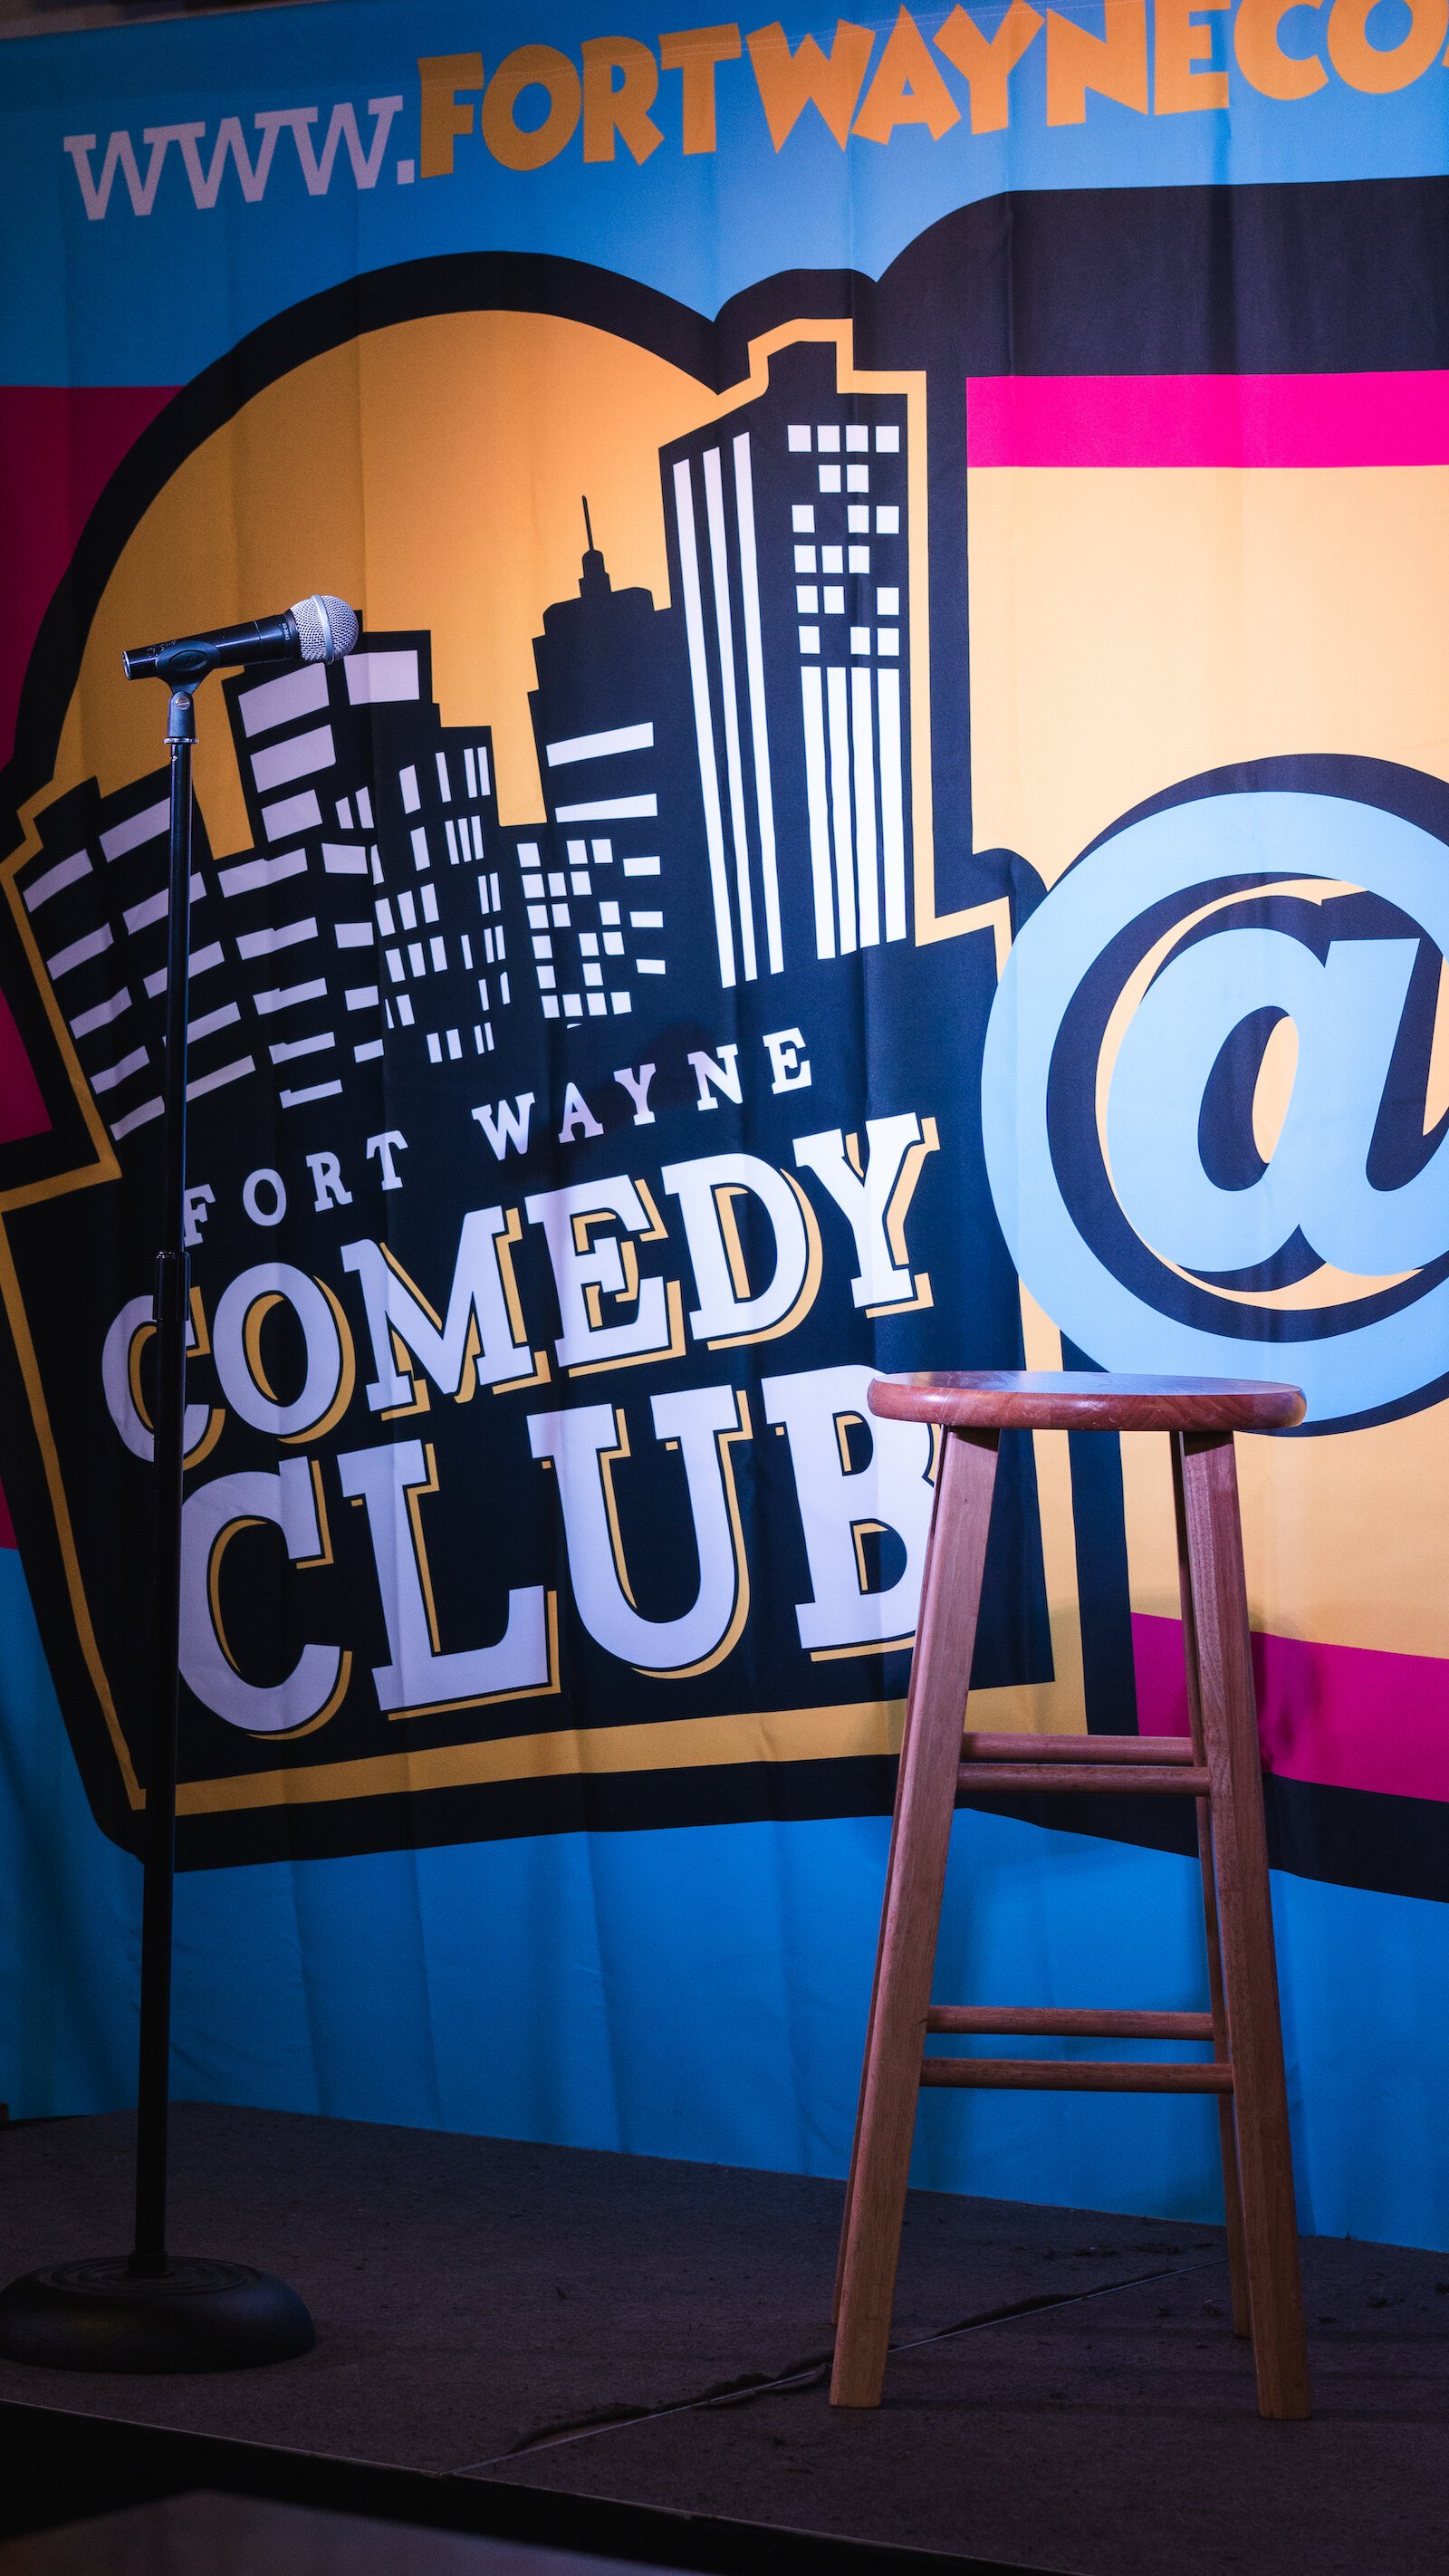 The stage at The Fort Wayne Comedy Club.